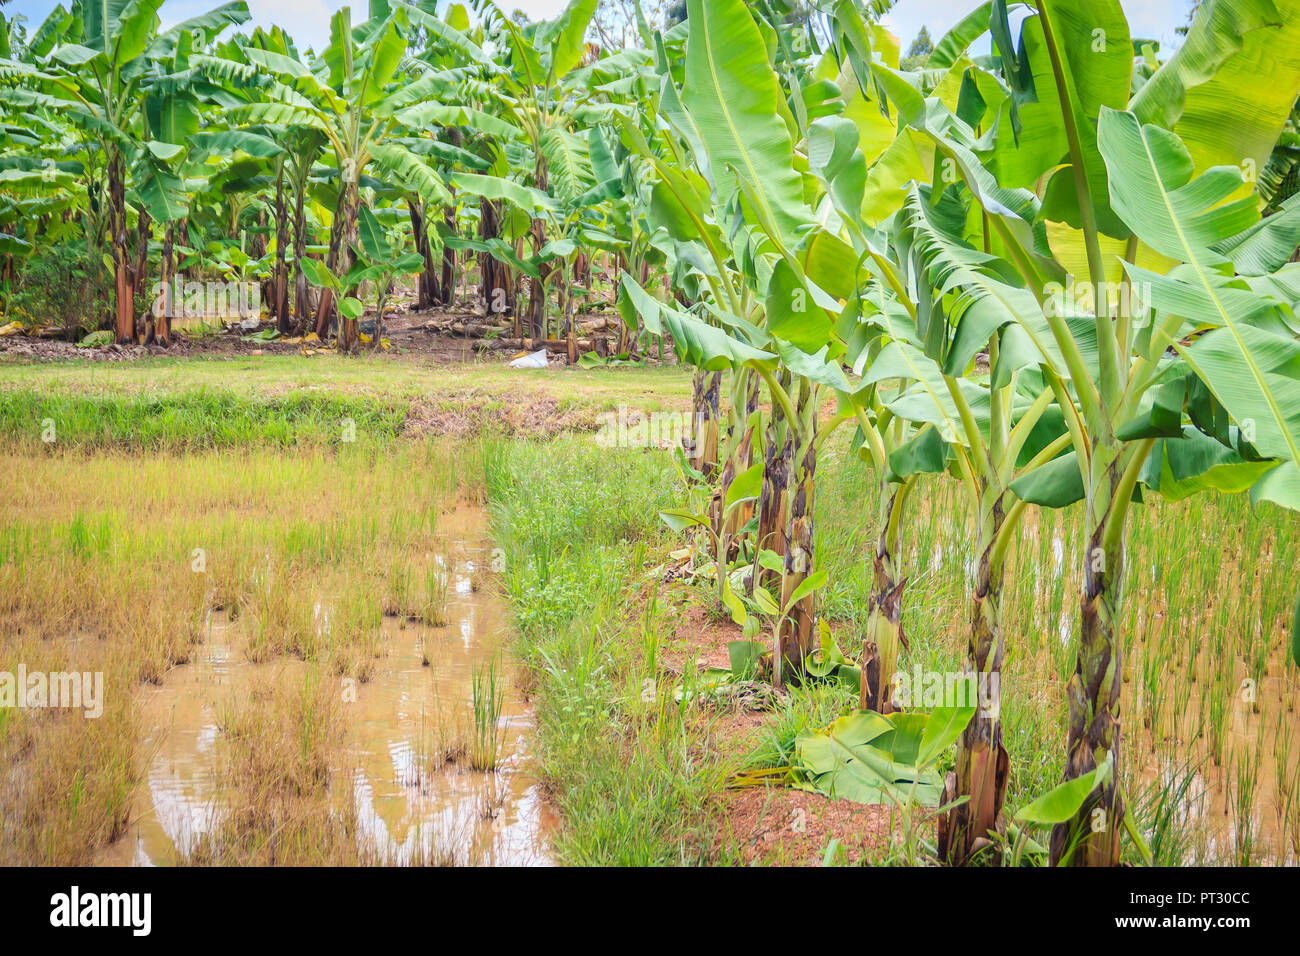 Mixed farming by planting banana trees in rice fields is agricultural  system in which a farmer conducts different agricultural practice together  two o Stock Photo - Alamy